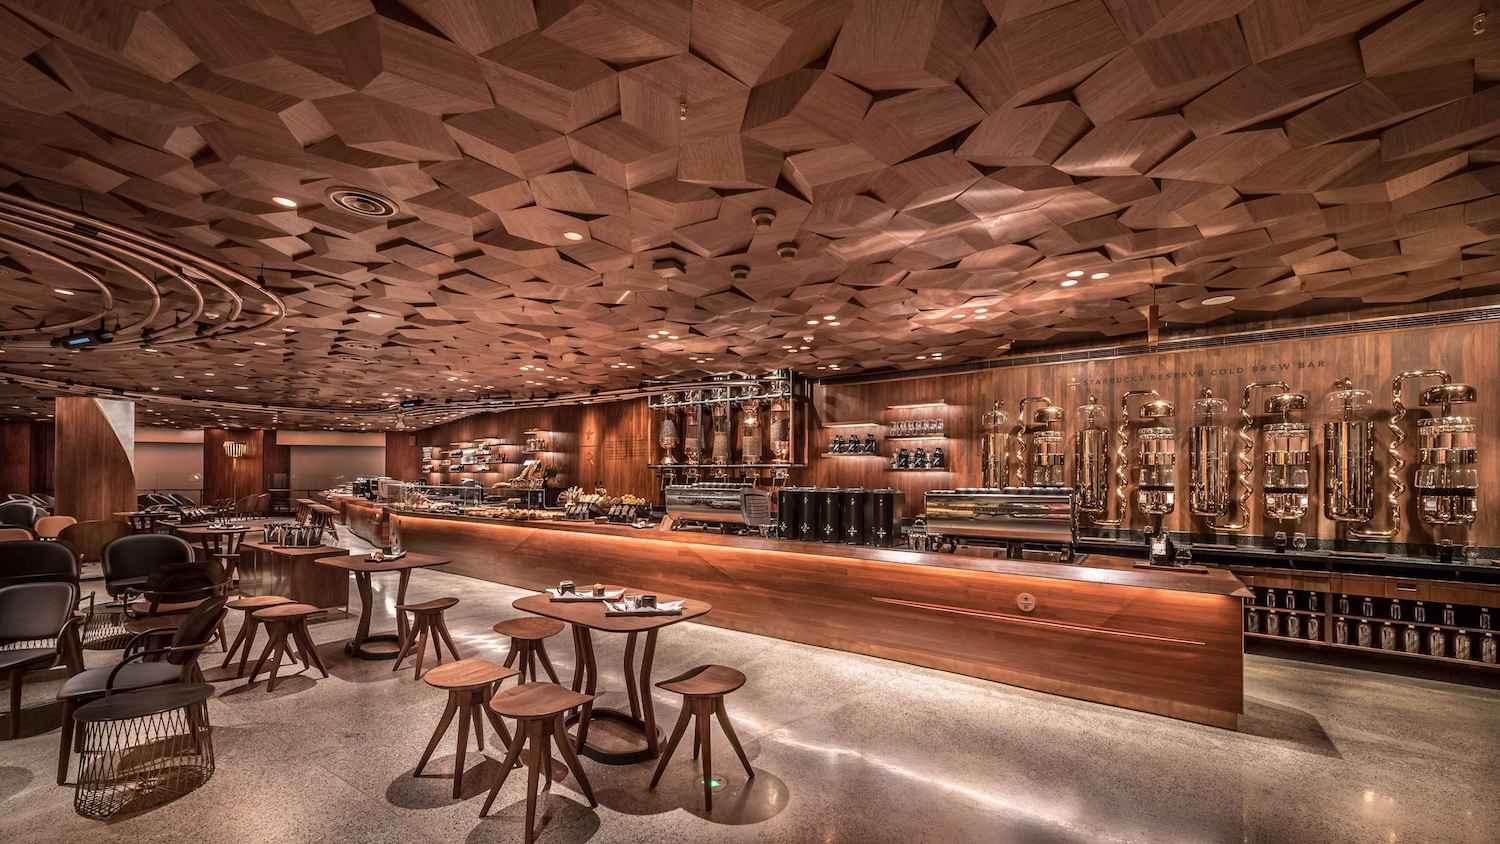 Starbucks Shanghai Roastery's interior design with a Chinese focus